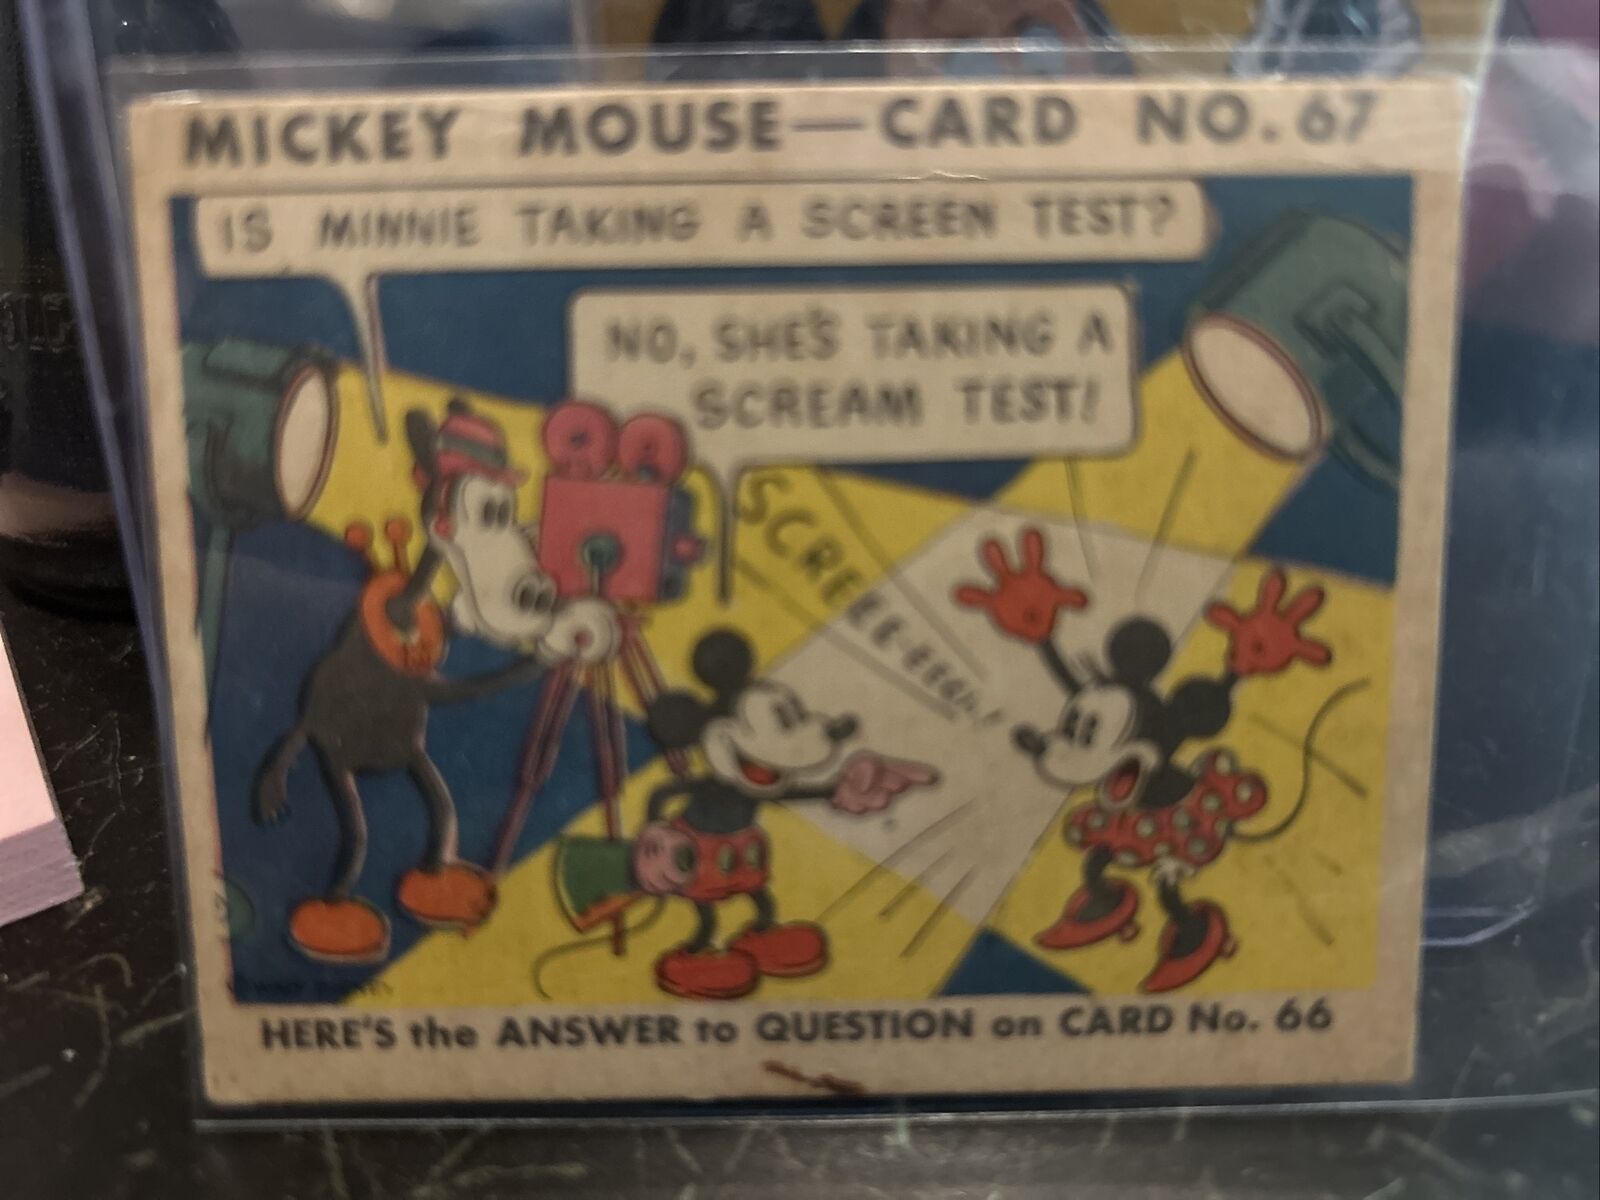 RARE 1935 Mickey Mouse Gum Card Type II #67 IS MINNIE TAKING A SCREEN TEST- NICE